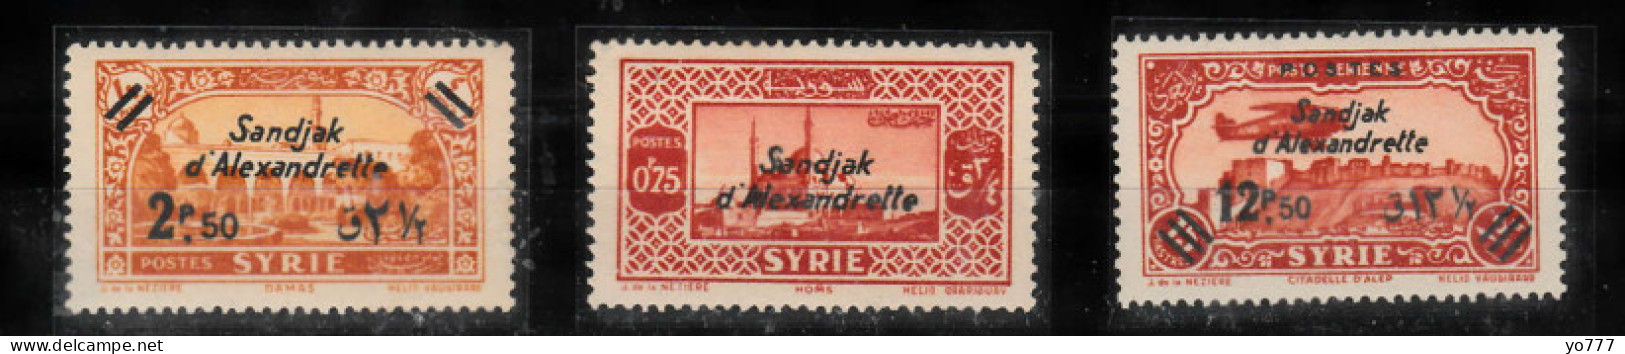 (H-011/12) 1938 HATAY STAMPS WITH BLACK SANDJAK D'ALEXANDRETTE SURCHARGE ON SYRIA POSTAGE AIRPOST STAMPS MNH** - 1934-39 Sandjak Alexandrette & Hatay